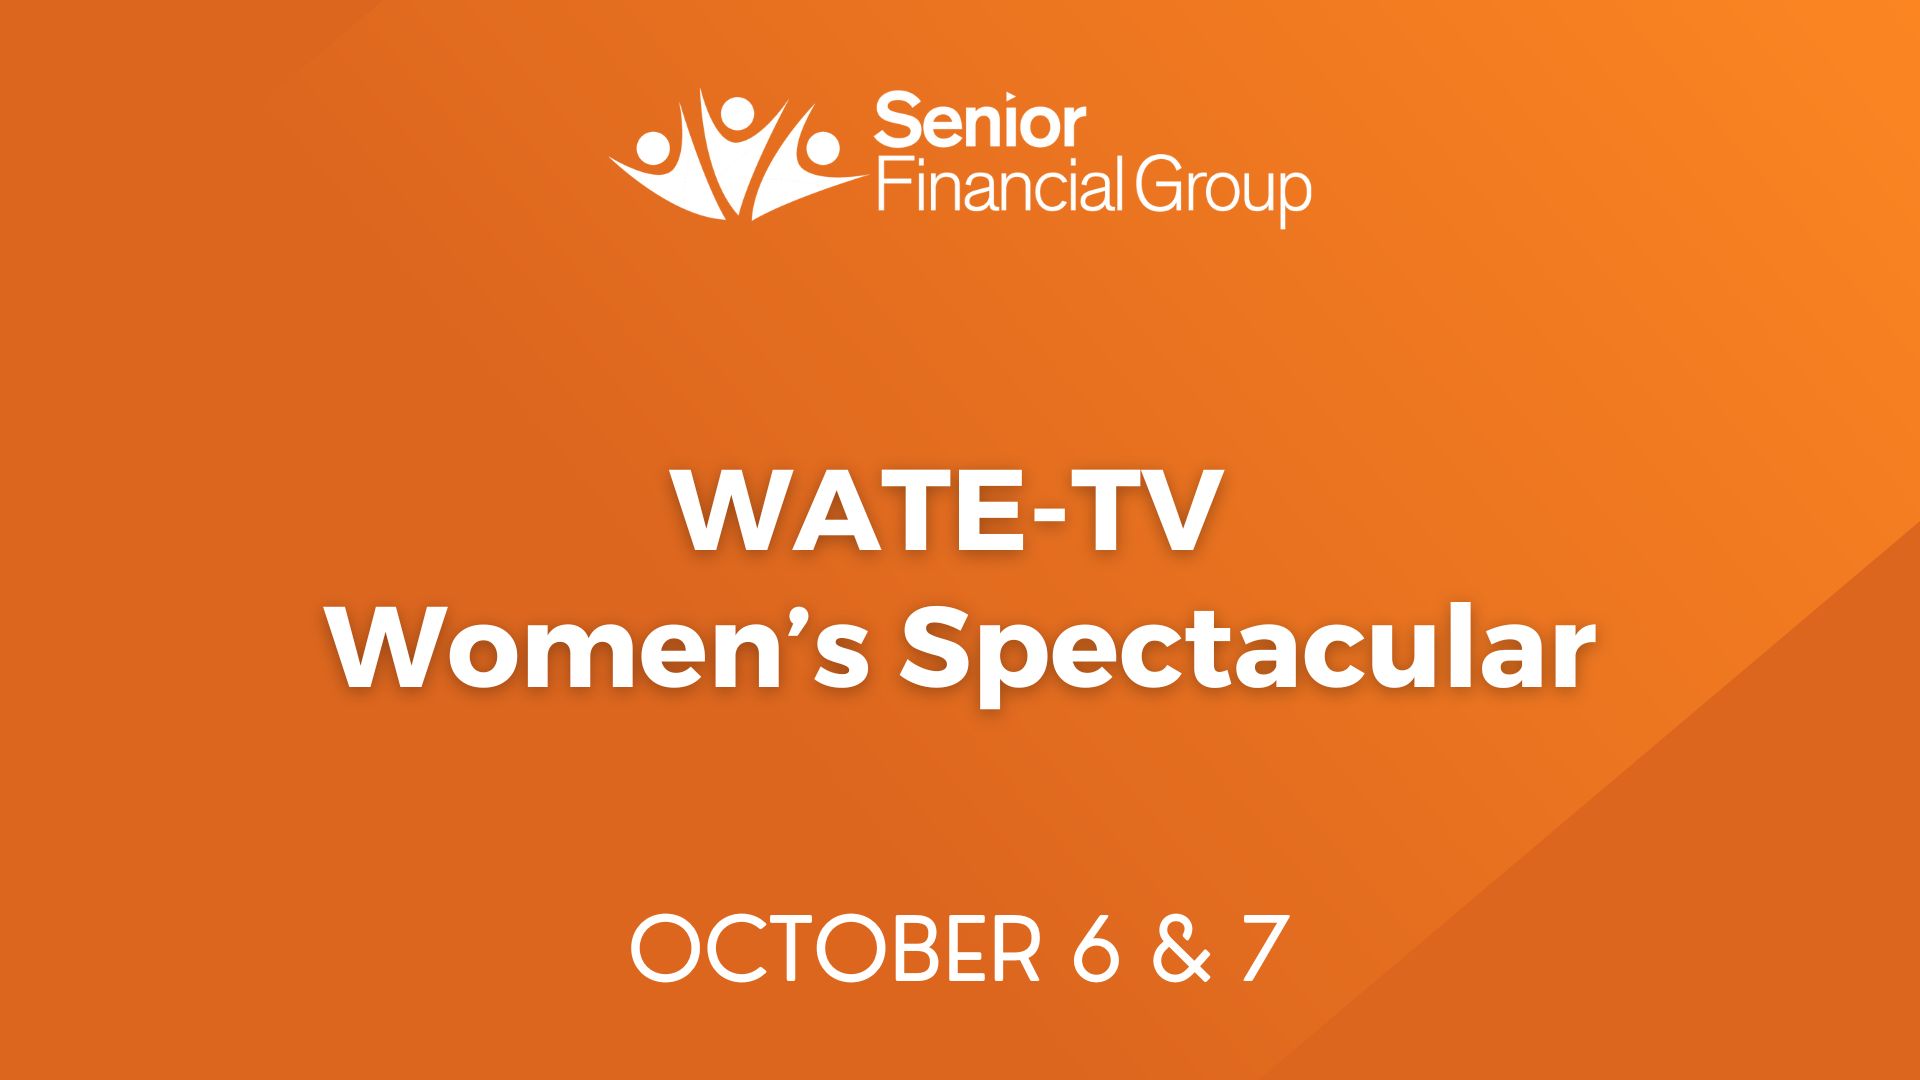 The WATE-TV Women's Spectacular event will take place on Friday, October 6 and Saturday, October 7.